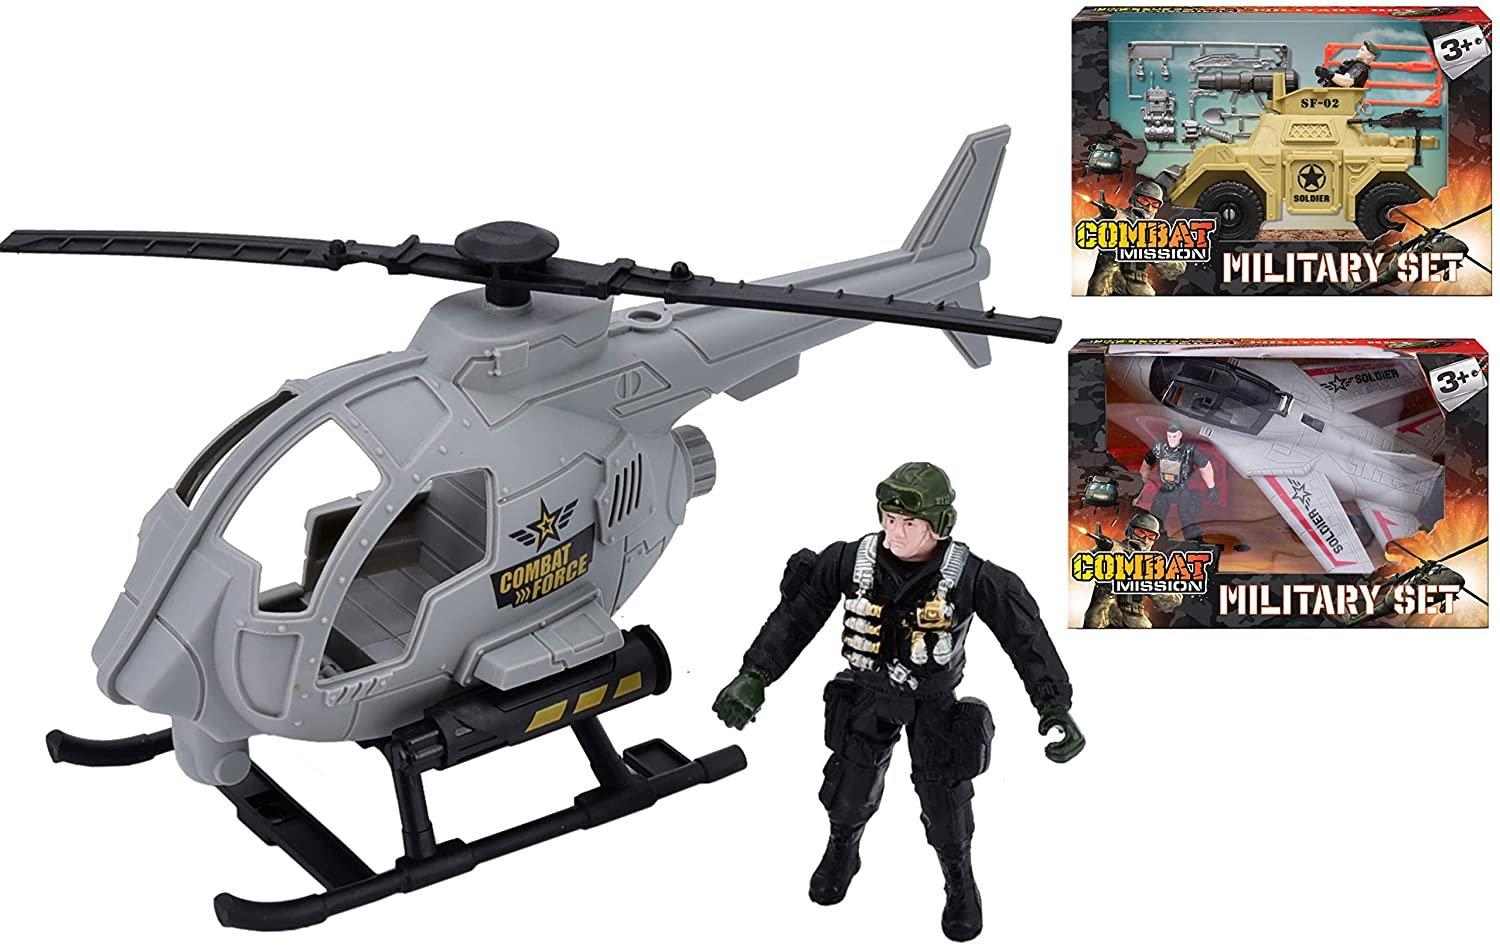 3 Piece Military Army Toy Set (One at Random)